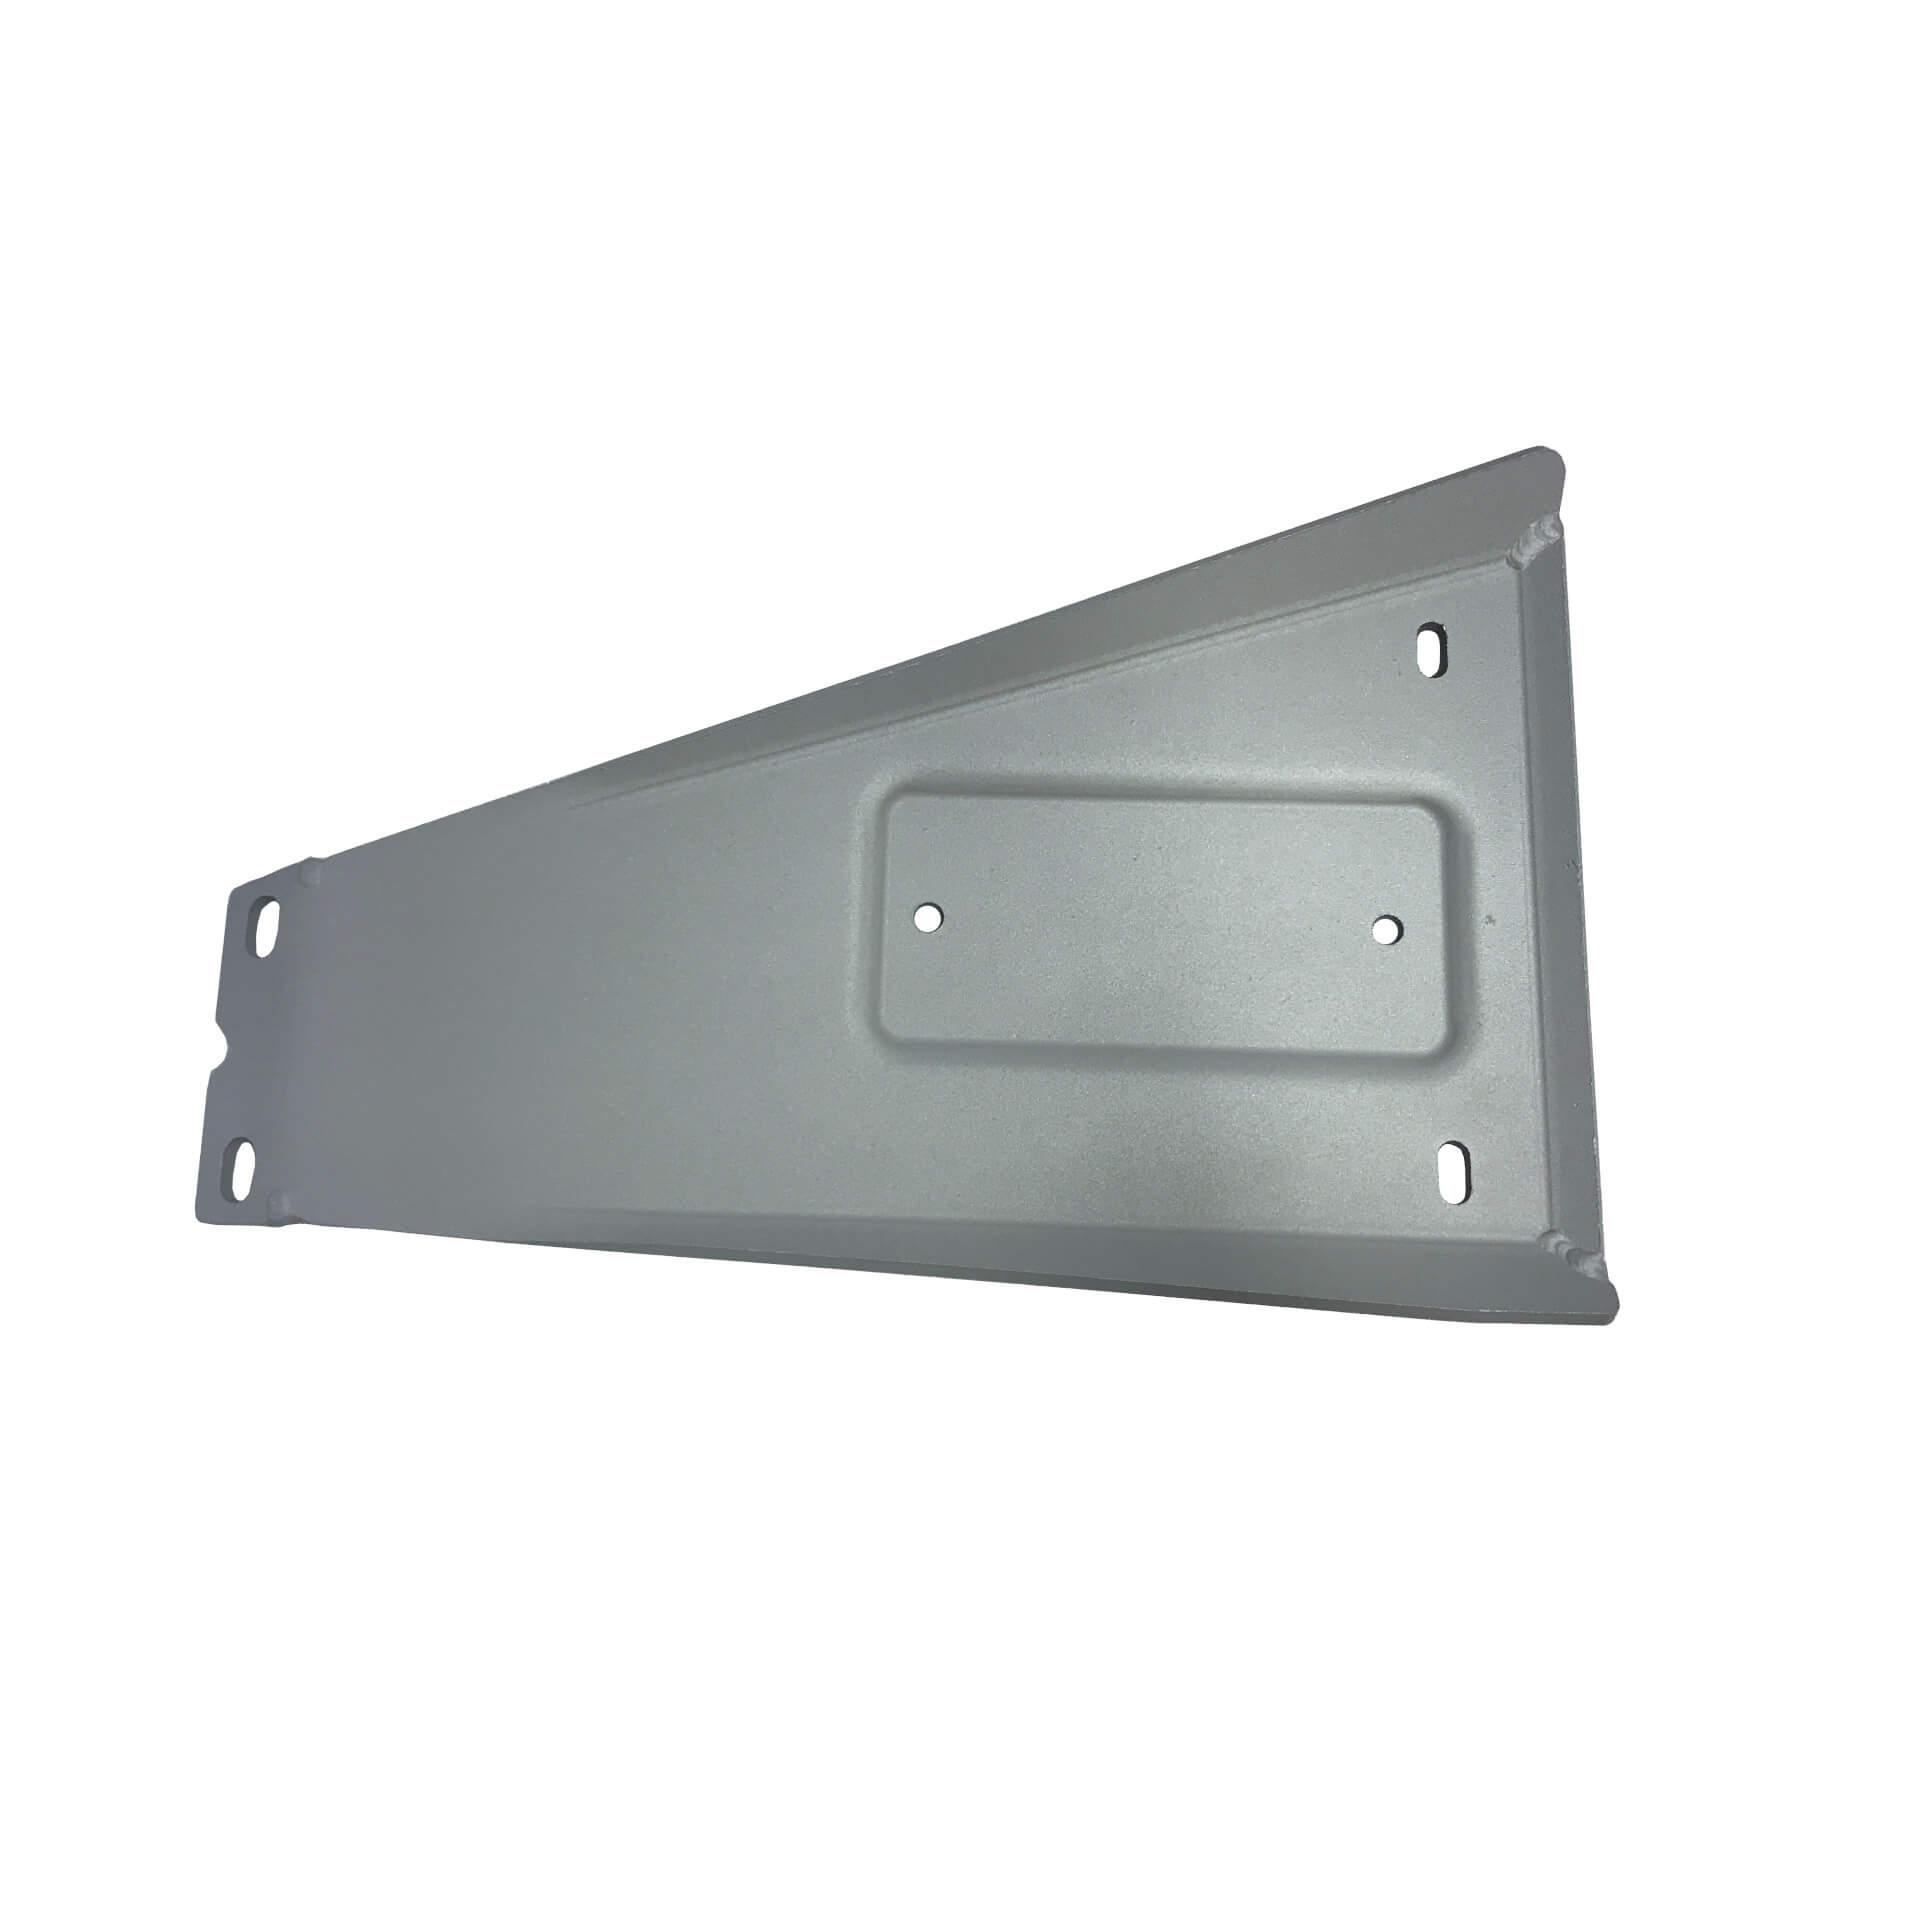 Euro6 Exhaust Underbody Skid Plates for Volkswagen Transporter T5 SWB -  - sold by Direct4x4